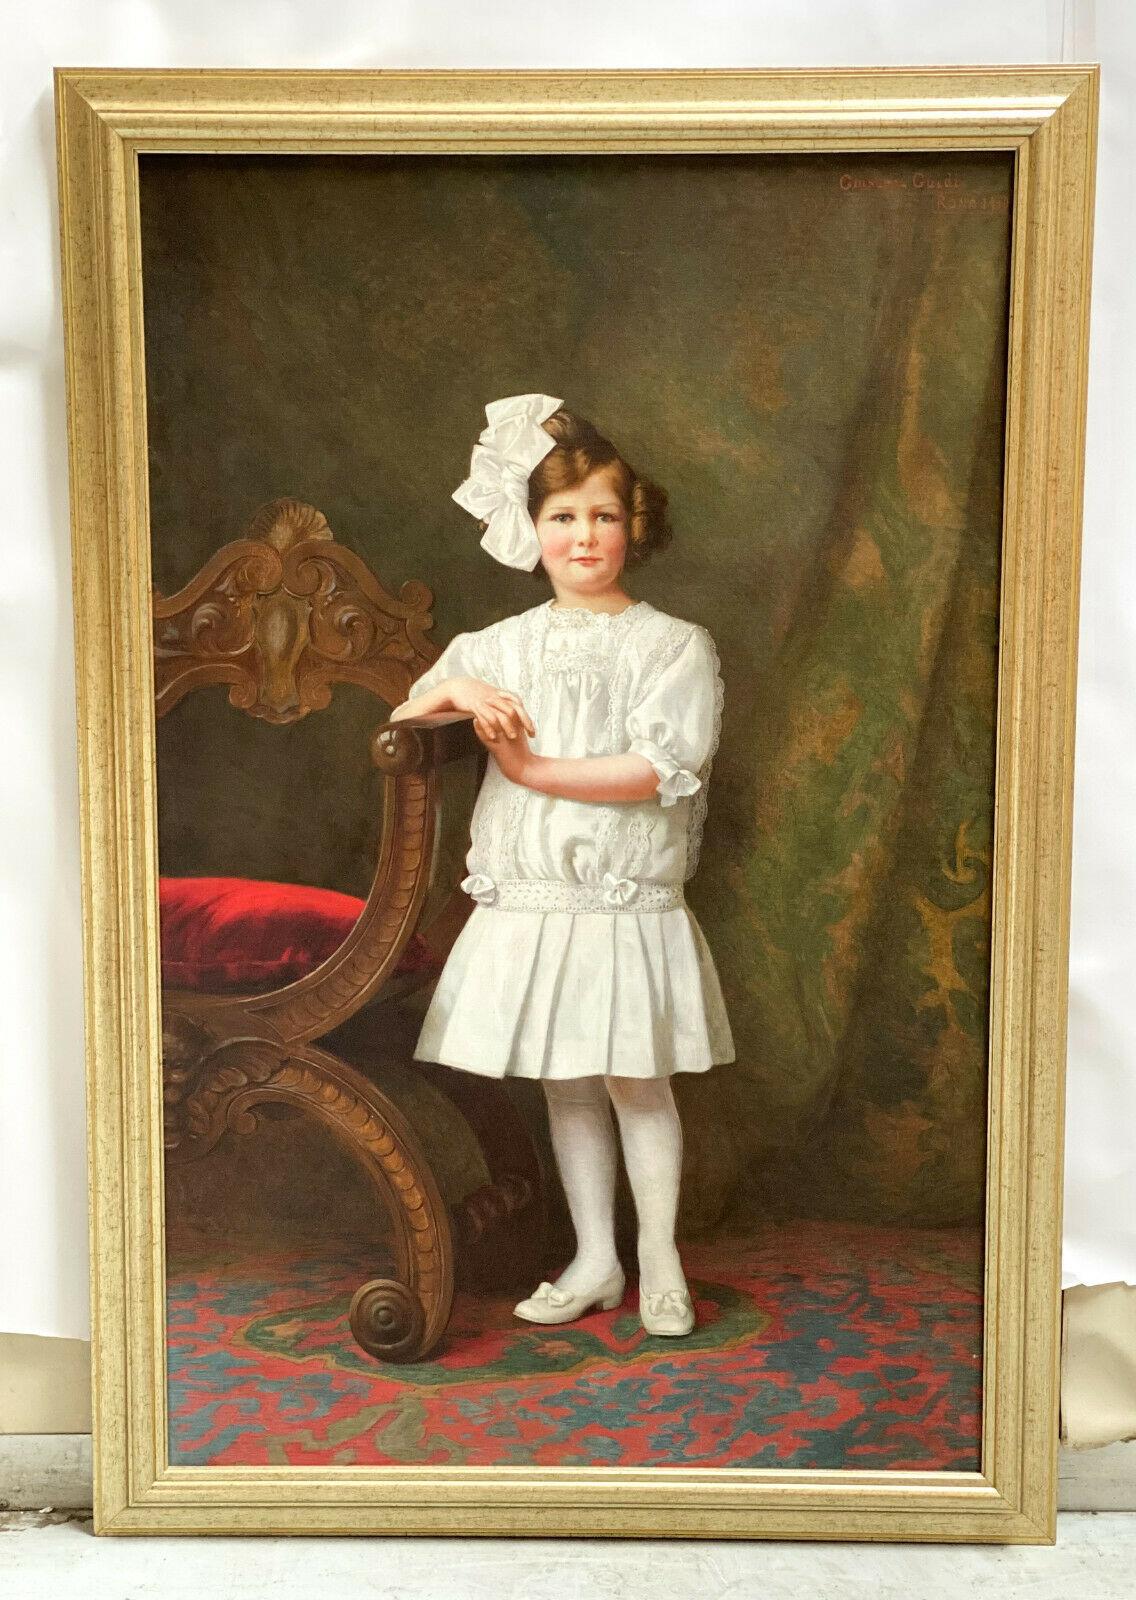 Giuseppe guidi oil on canvas young girl in White Dress, 1910

The painting depicts a young girl in a wearing a white dress and headband leaning against a chair against a draped backdrop. Artist signed 